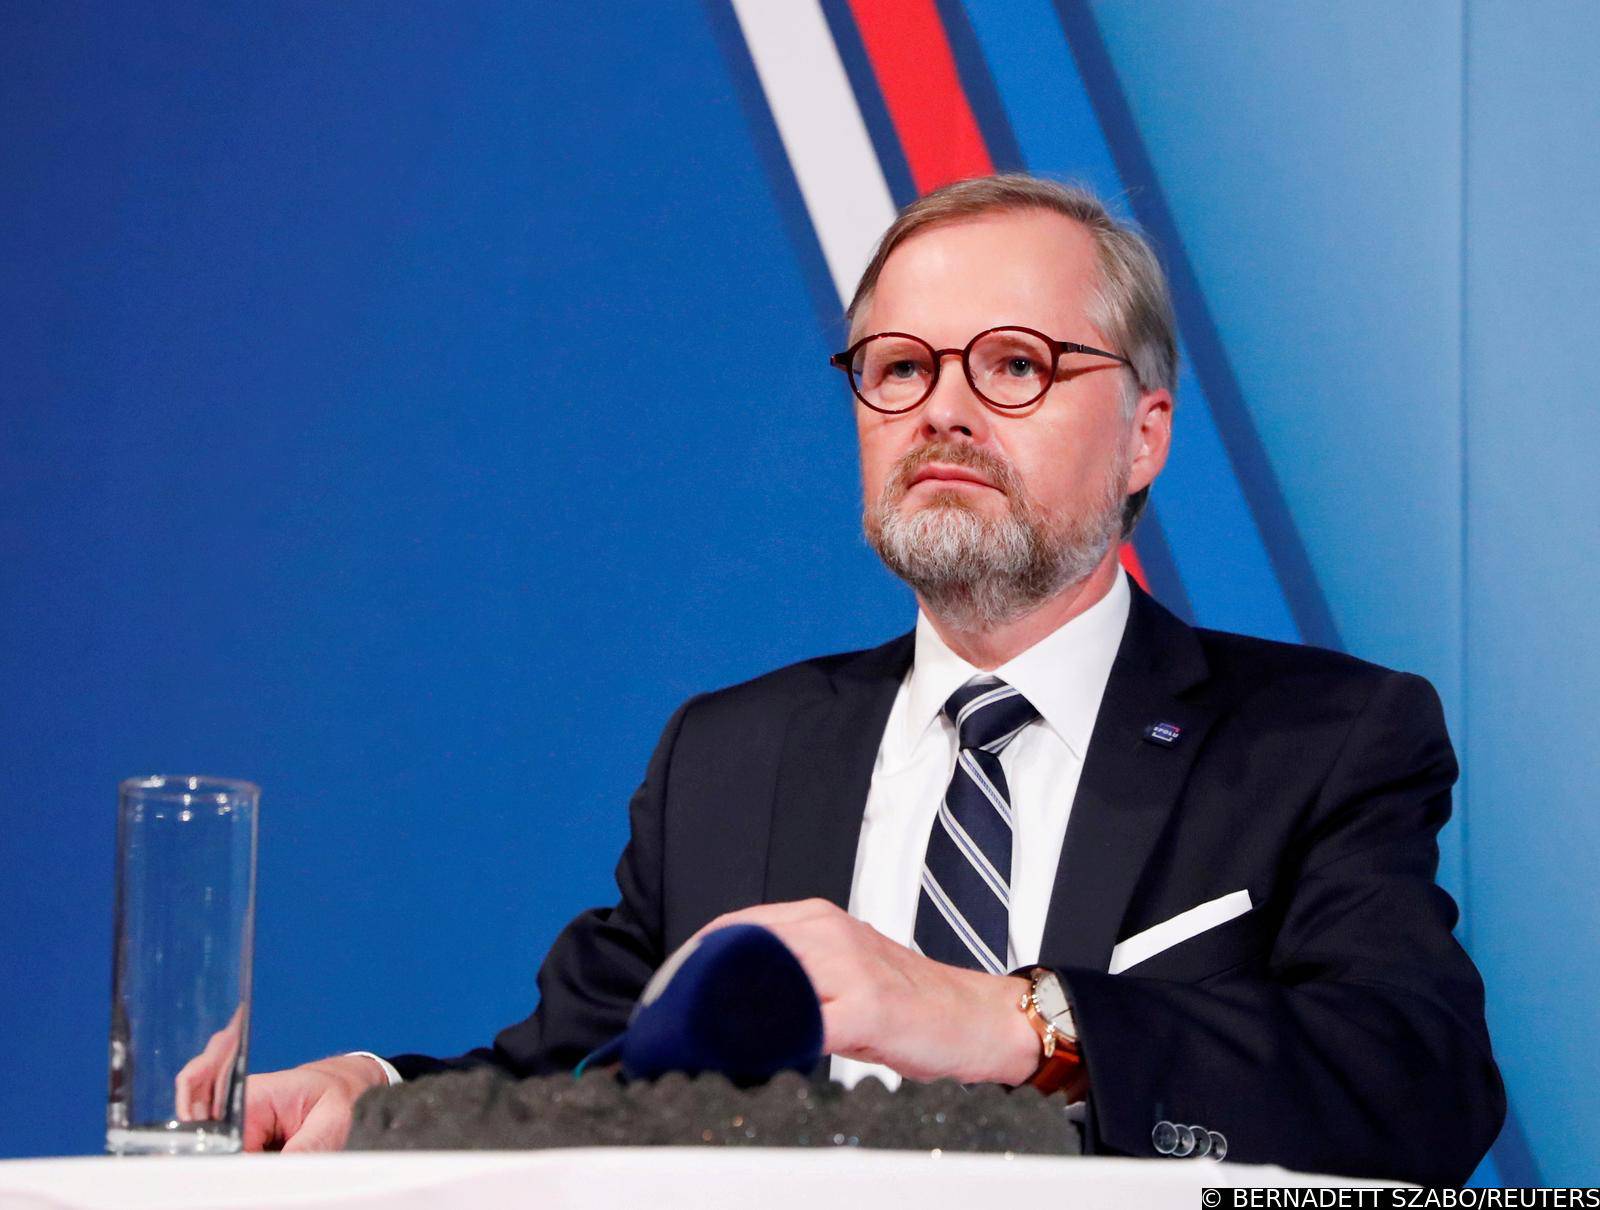 FILE PHOTO: Leader of Civic Democratic Party (ODS) and Together (SPOLU) coalition candidate for prime minister Petr Fiala attends the last radio debate before the country's parliamentary election in Prague